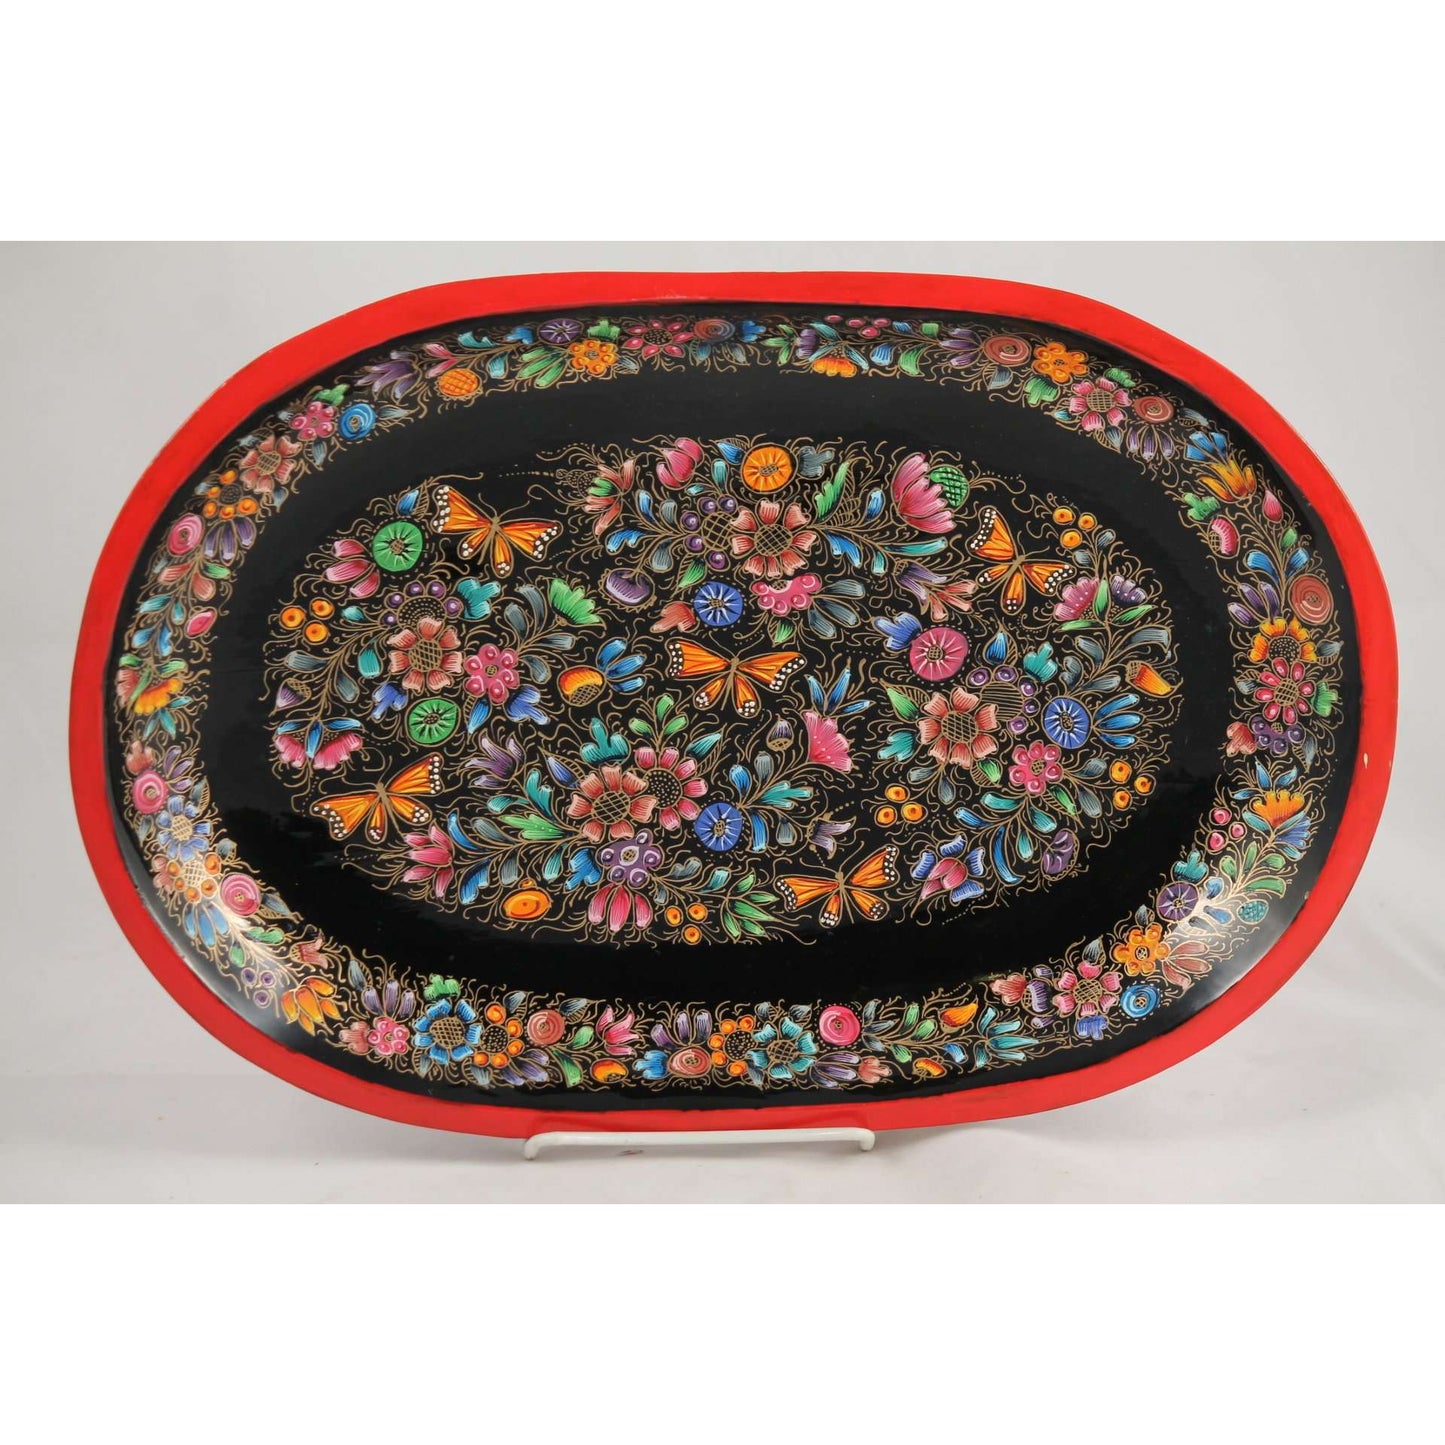 Oval Wood Plate/Lacquer Ware Folk Art Mexico Collectible Award Winning Artisan